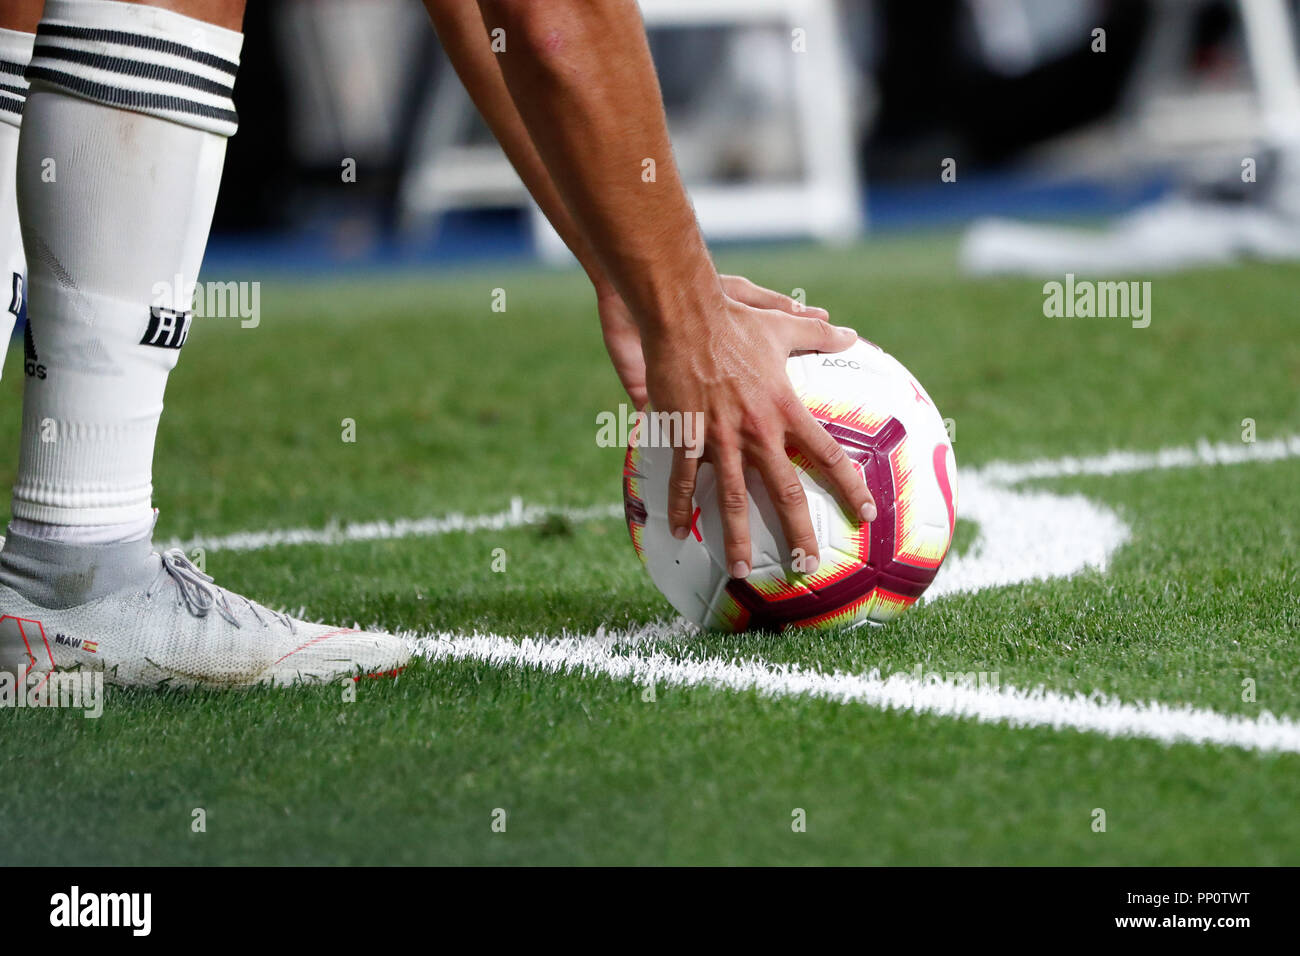 September 22, 2018 - Marco Asensio of Real Madrid with the Nike ball of match during the La Liga (Spanish Championship) football match between Real Madrid and RCD on September